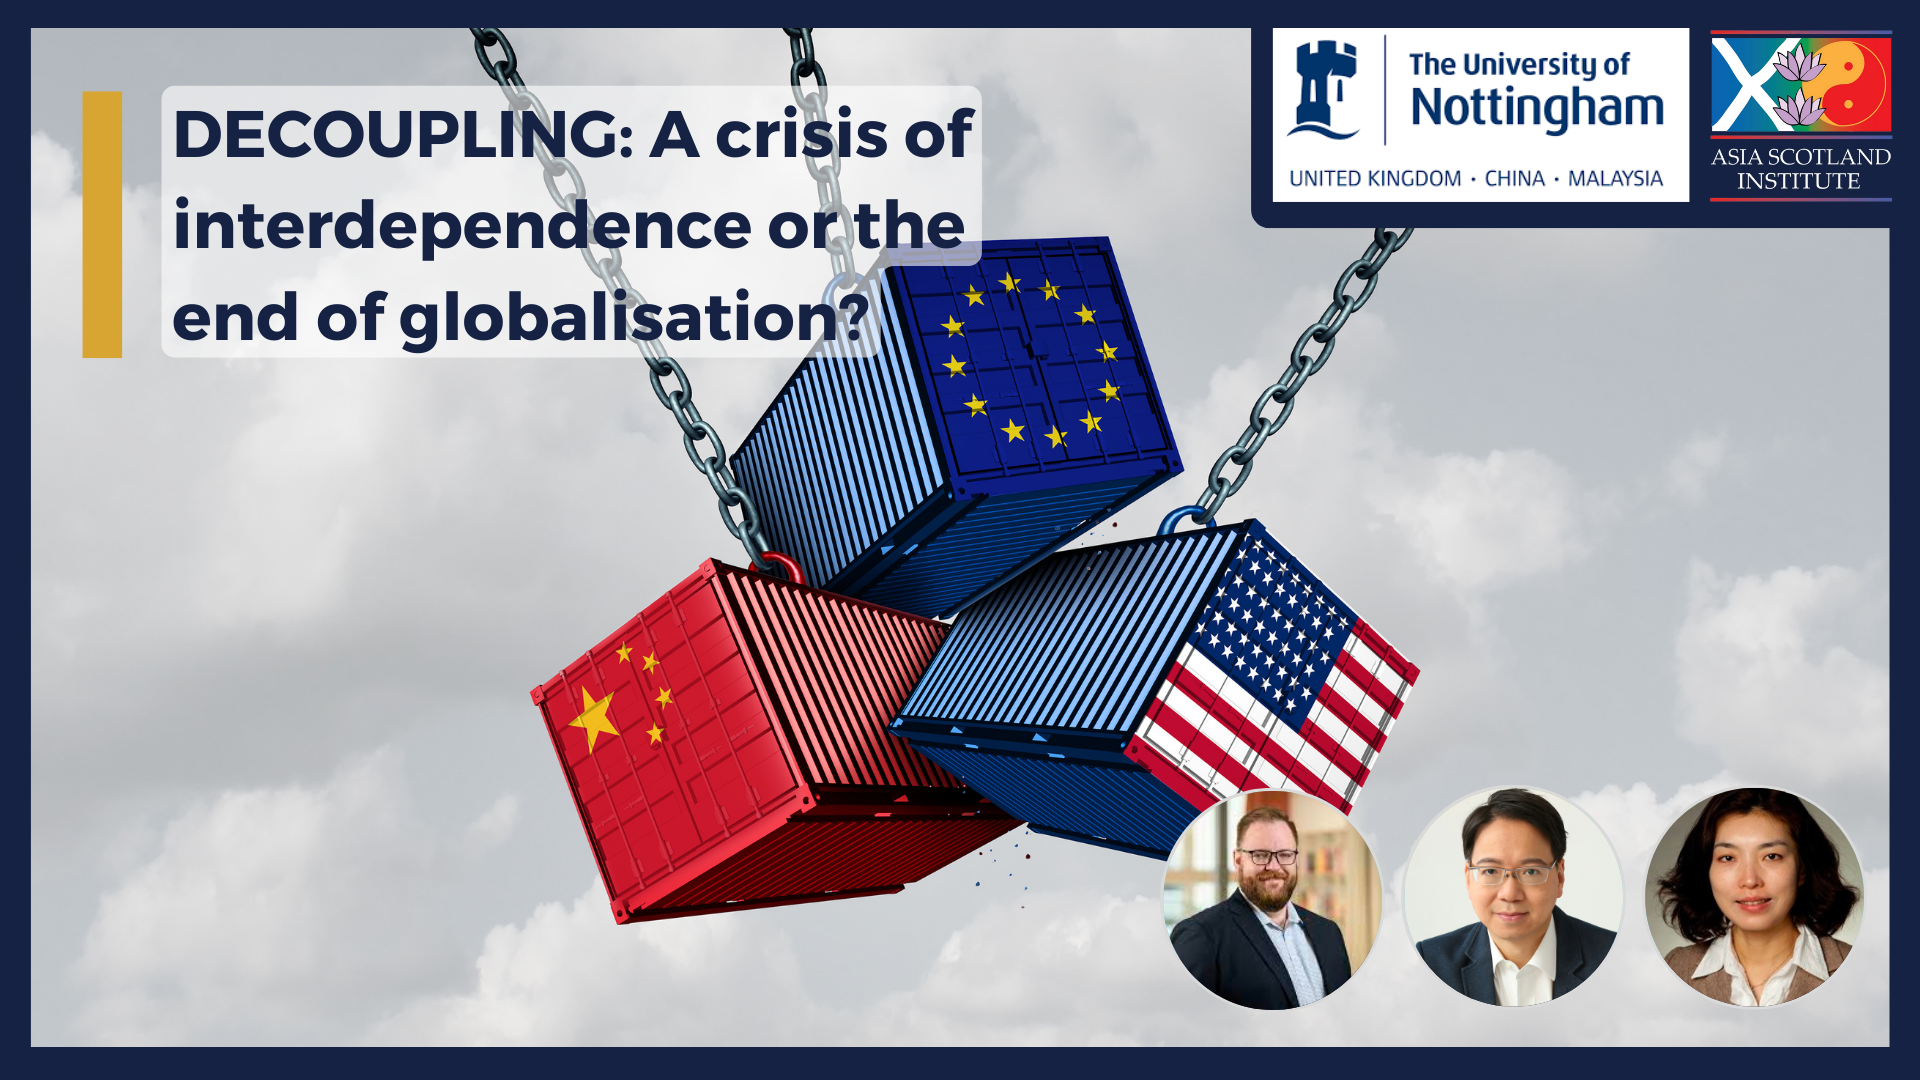 DECOUPLING A crisis of interdependence or the end of globalisation 1920 × 1080